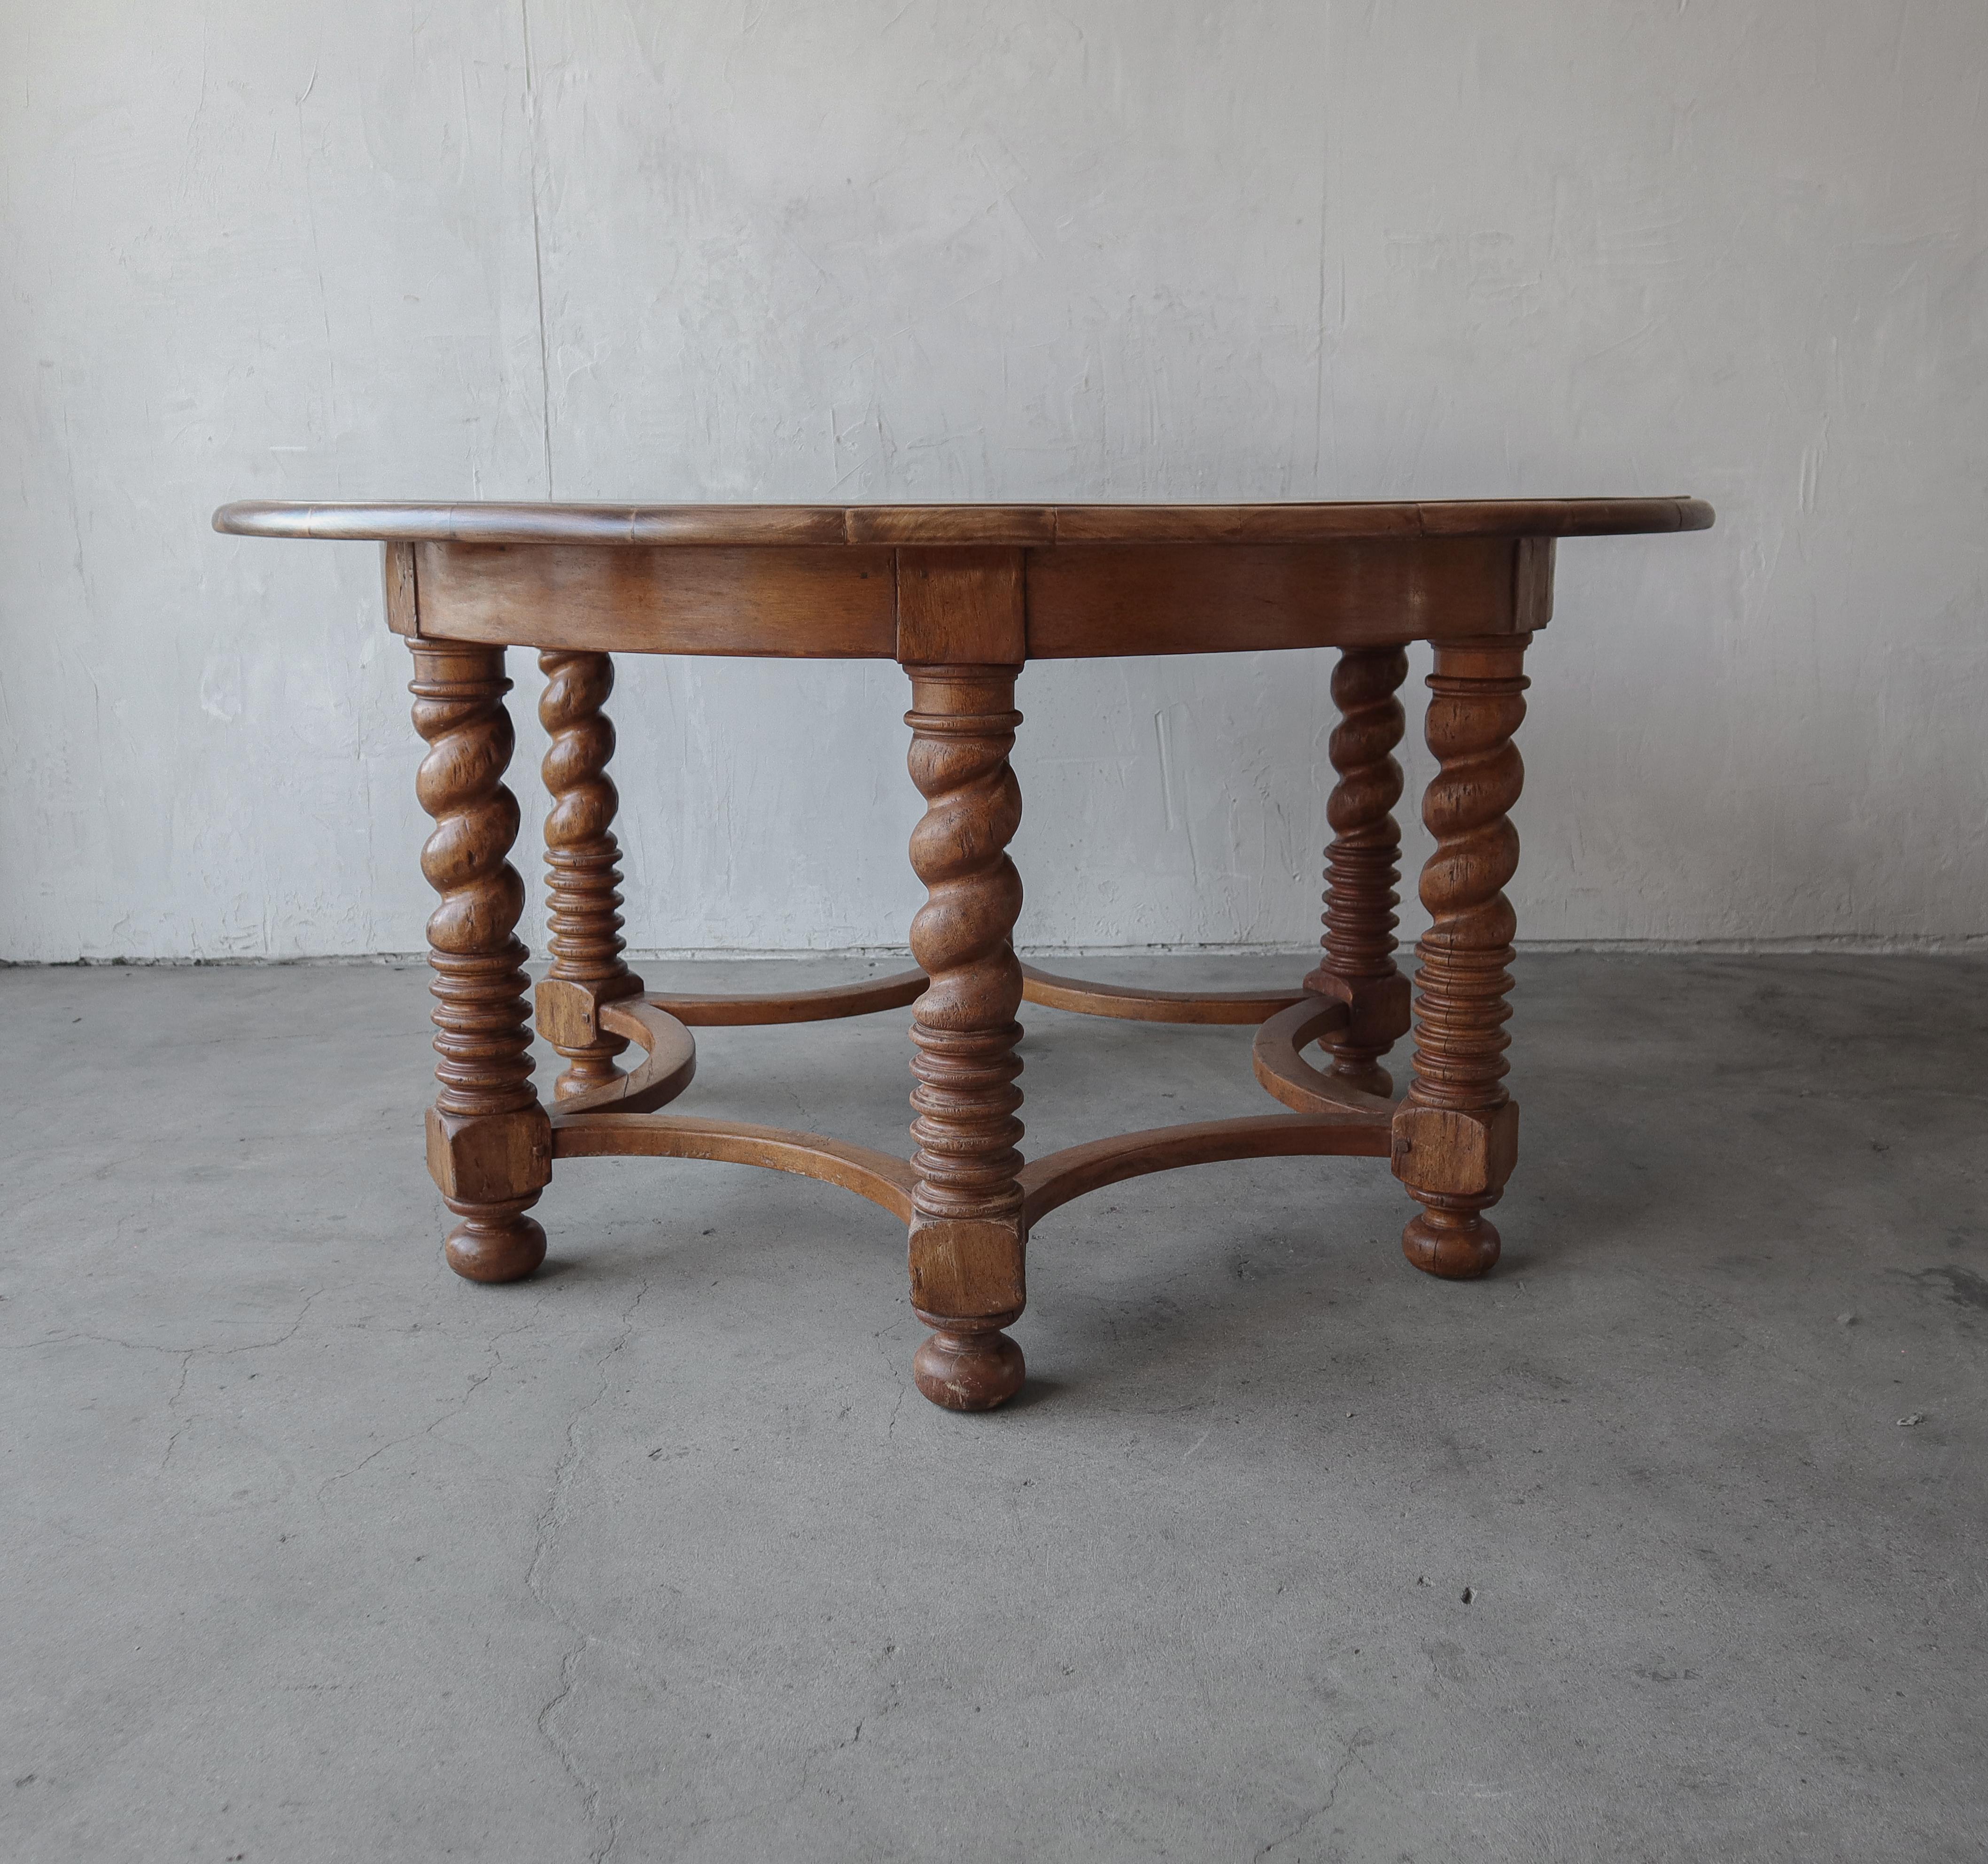 5ft Round European Walnut Barley Twist Dining Table In Good Condition For Sale In Las Vegas, NV